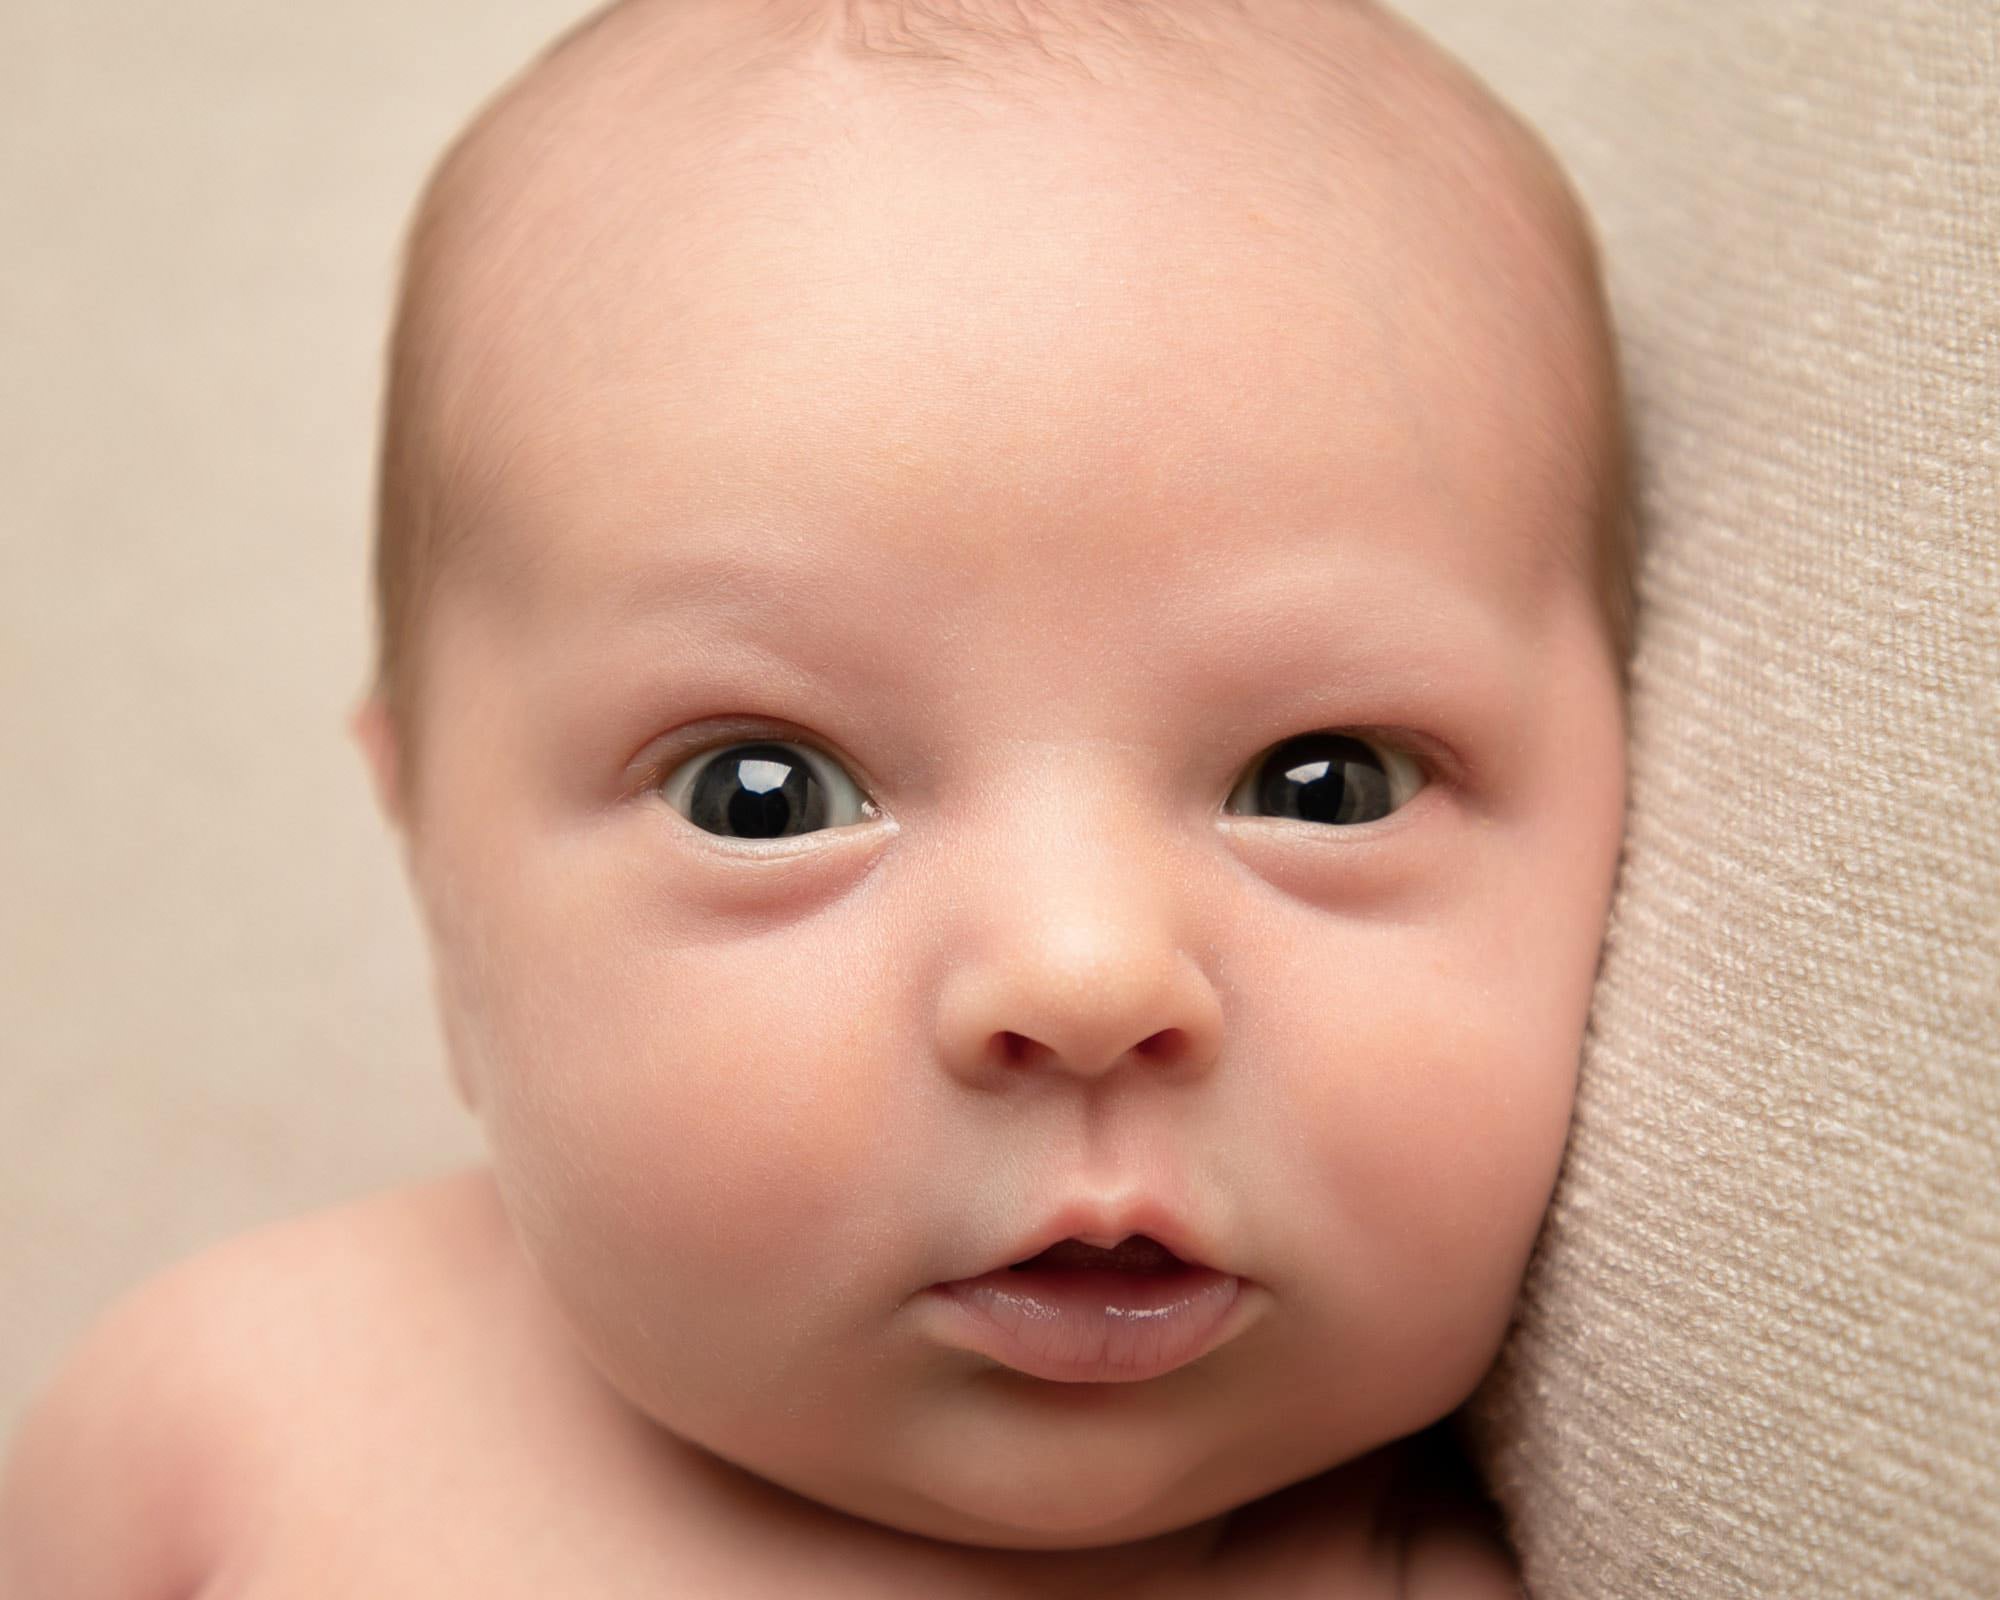 Baby boy eyes open looking at camera during newborn photoshoot by Glasgow baby photoshoot